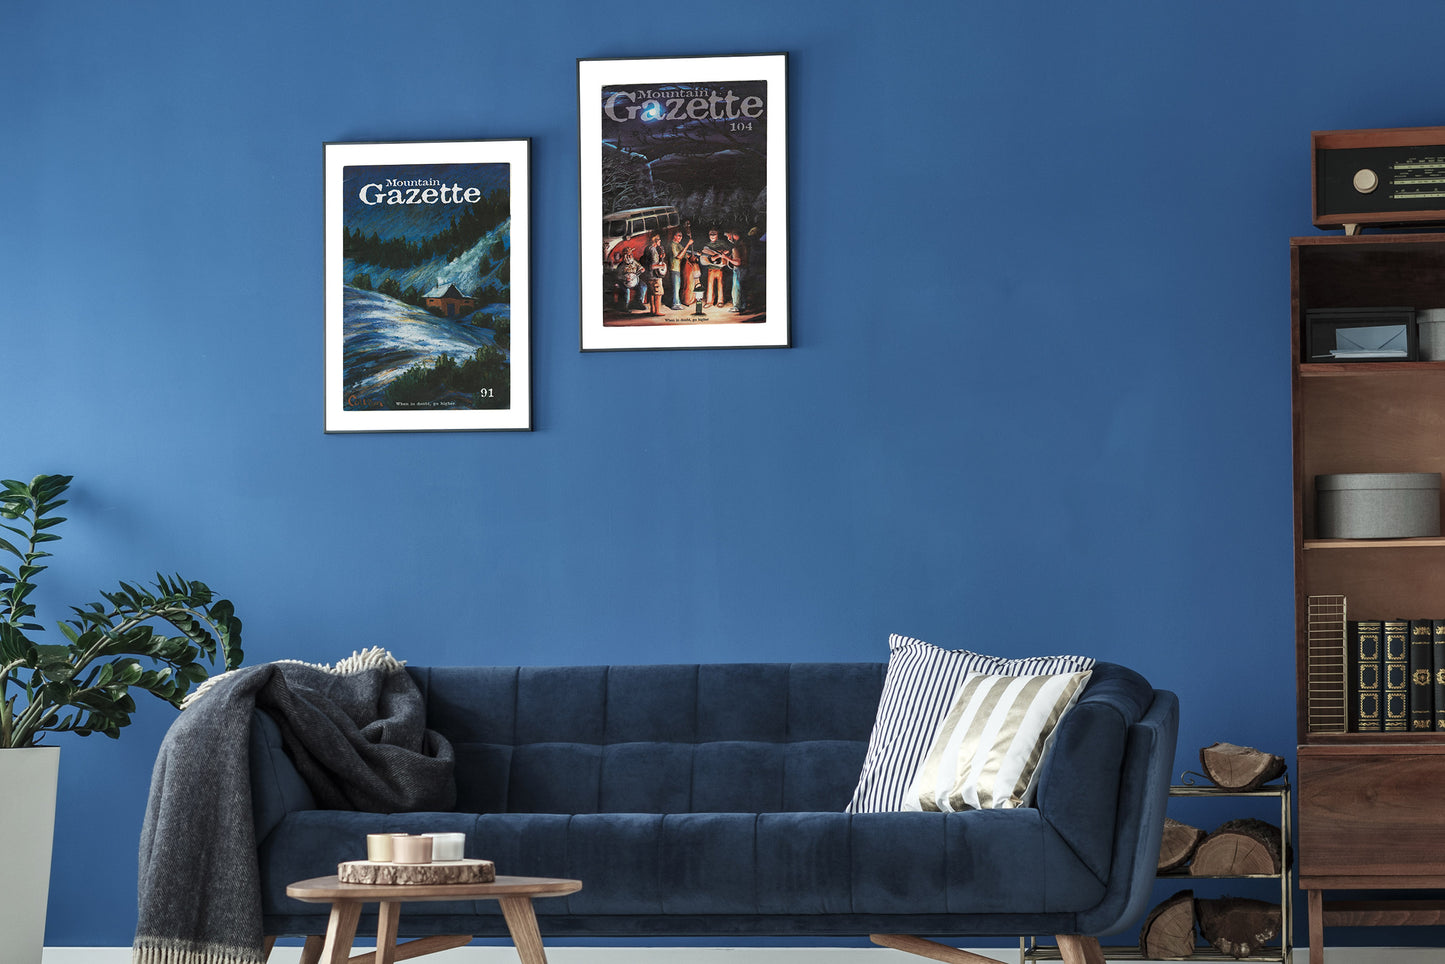 Framed vintage cover art of Mountain Gazette issue 104 shown on a blue wall